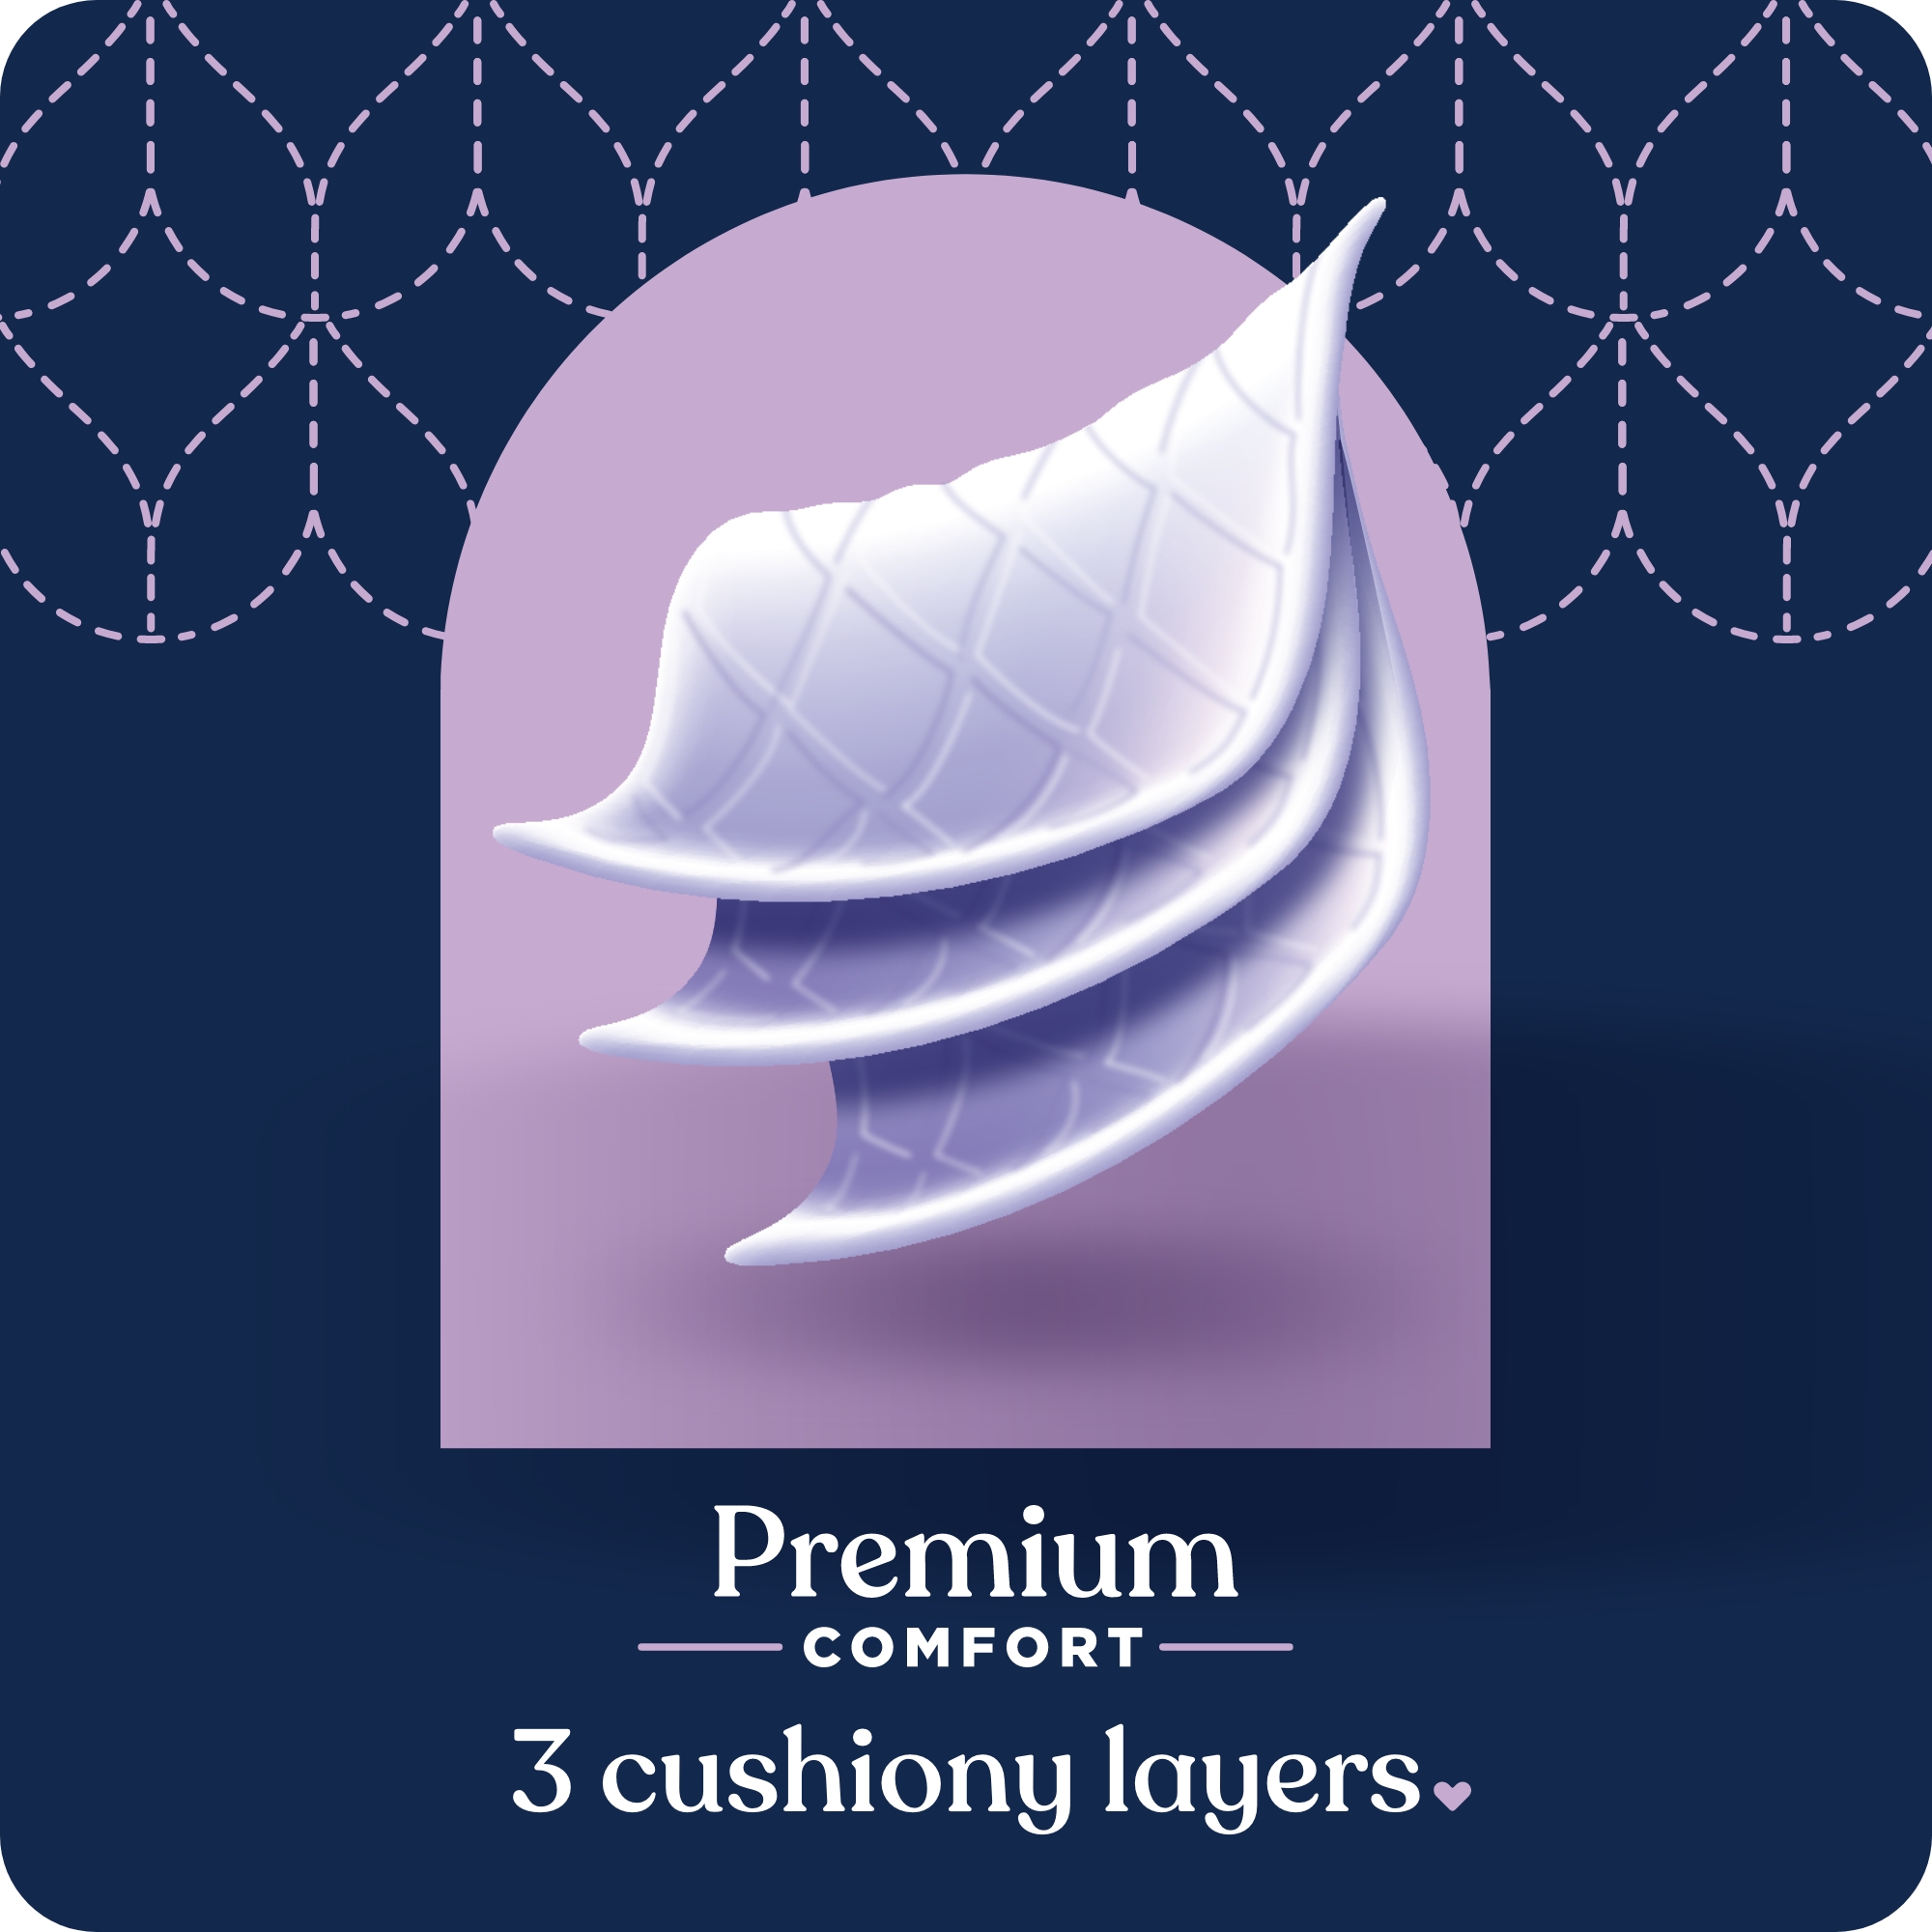 Quilted Northern Ultra Plush Toilet Paper, 24 Mega Rolls - image 3 of 13